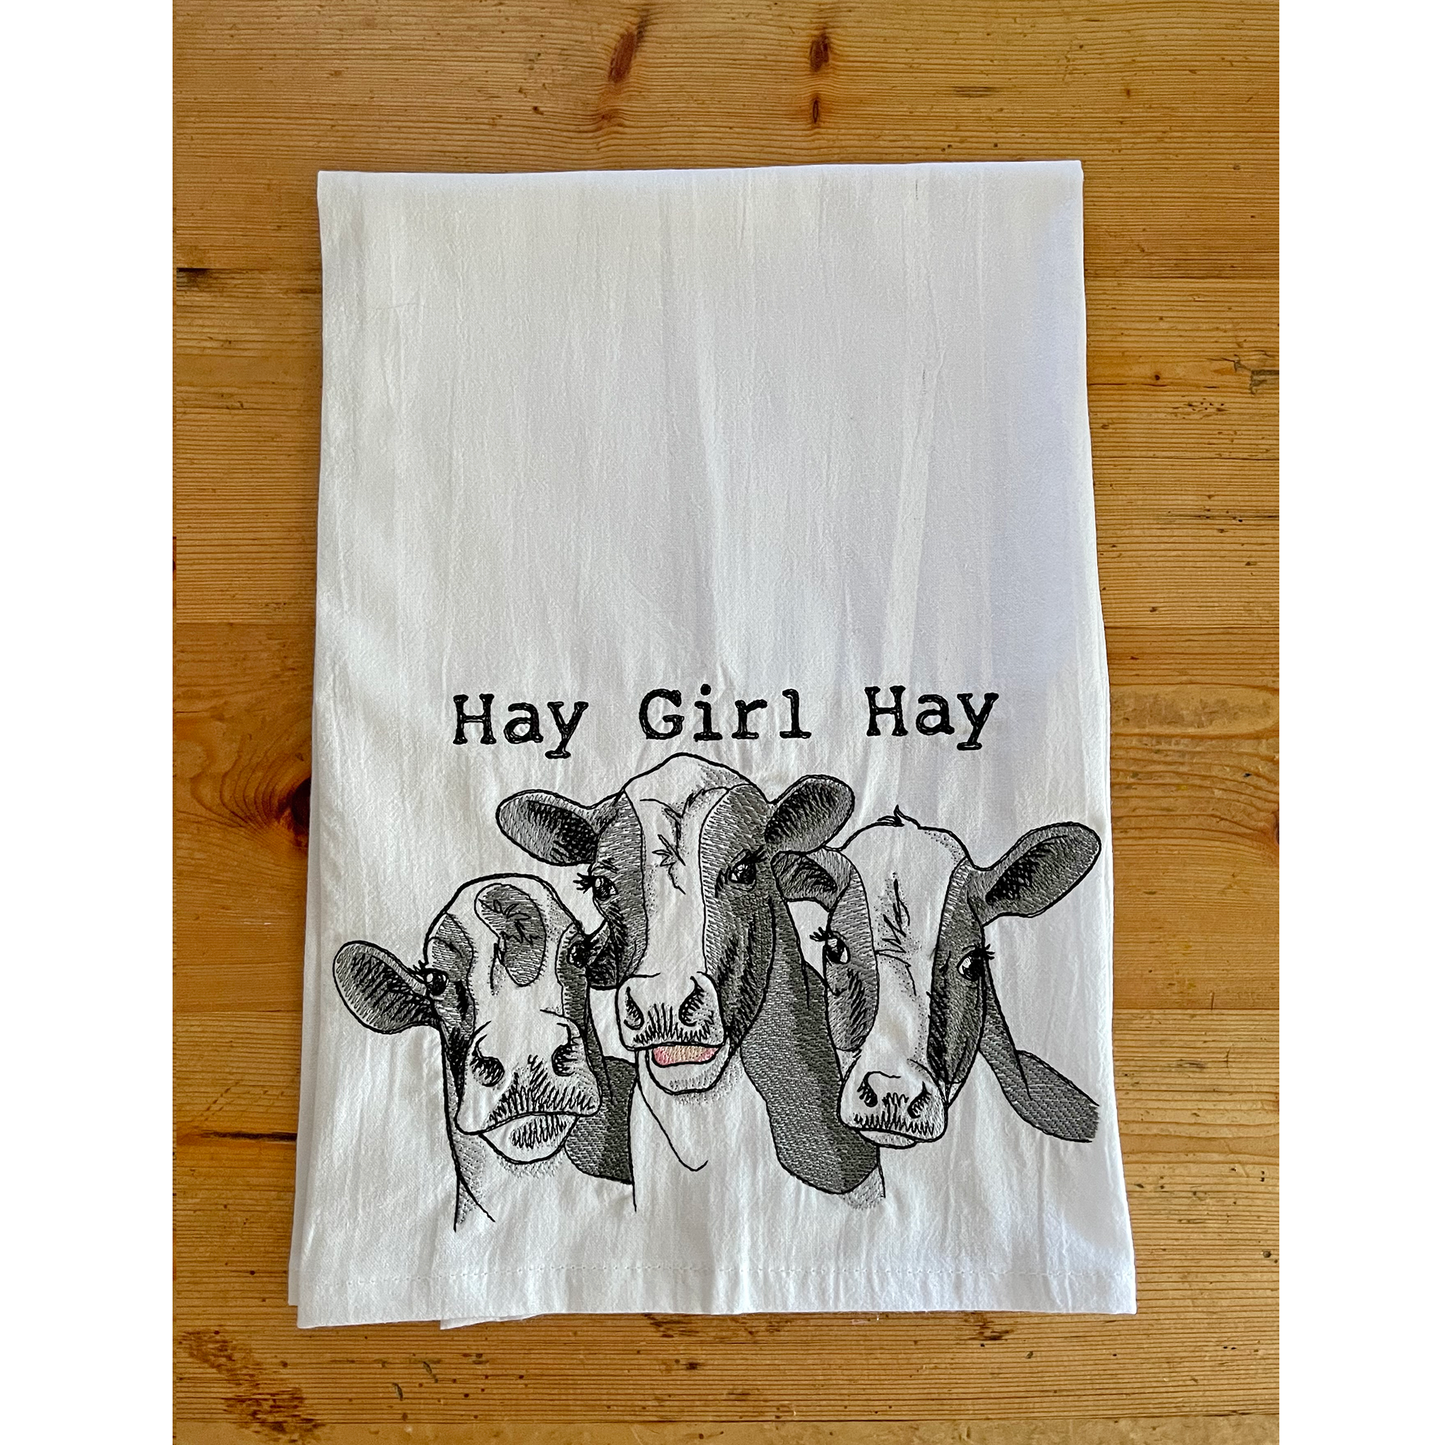 Hay Girl Hay - Embroidered Flour Sack Kitchen Towel